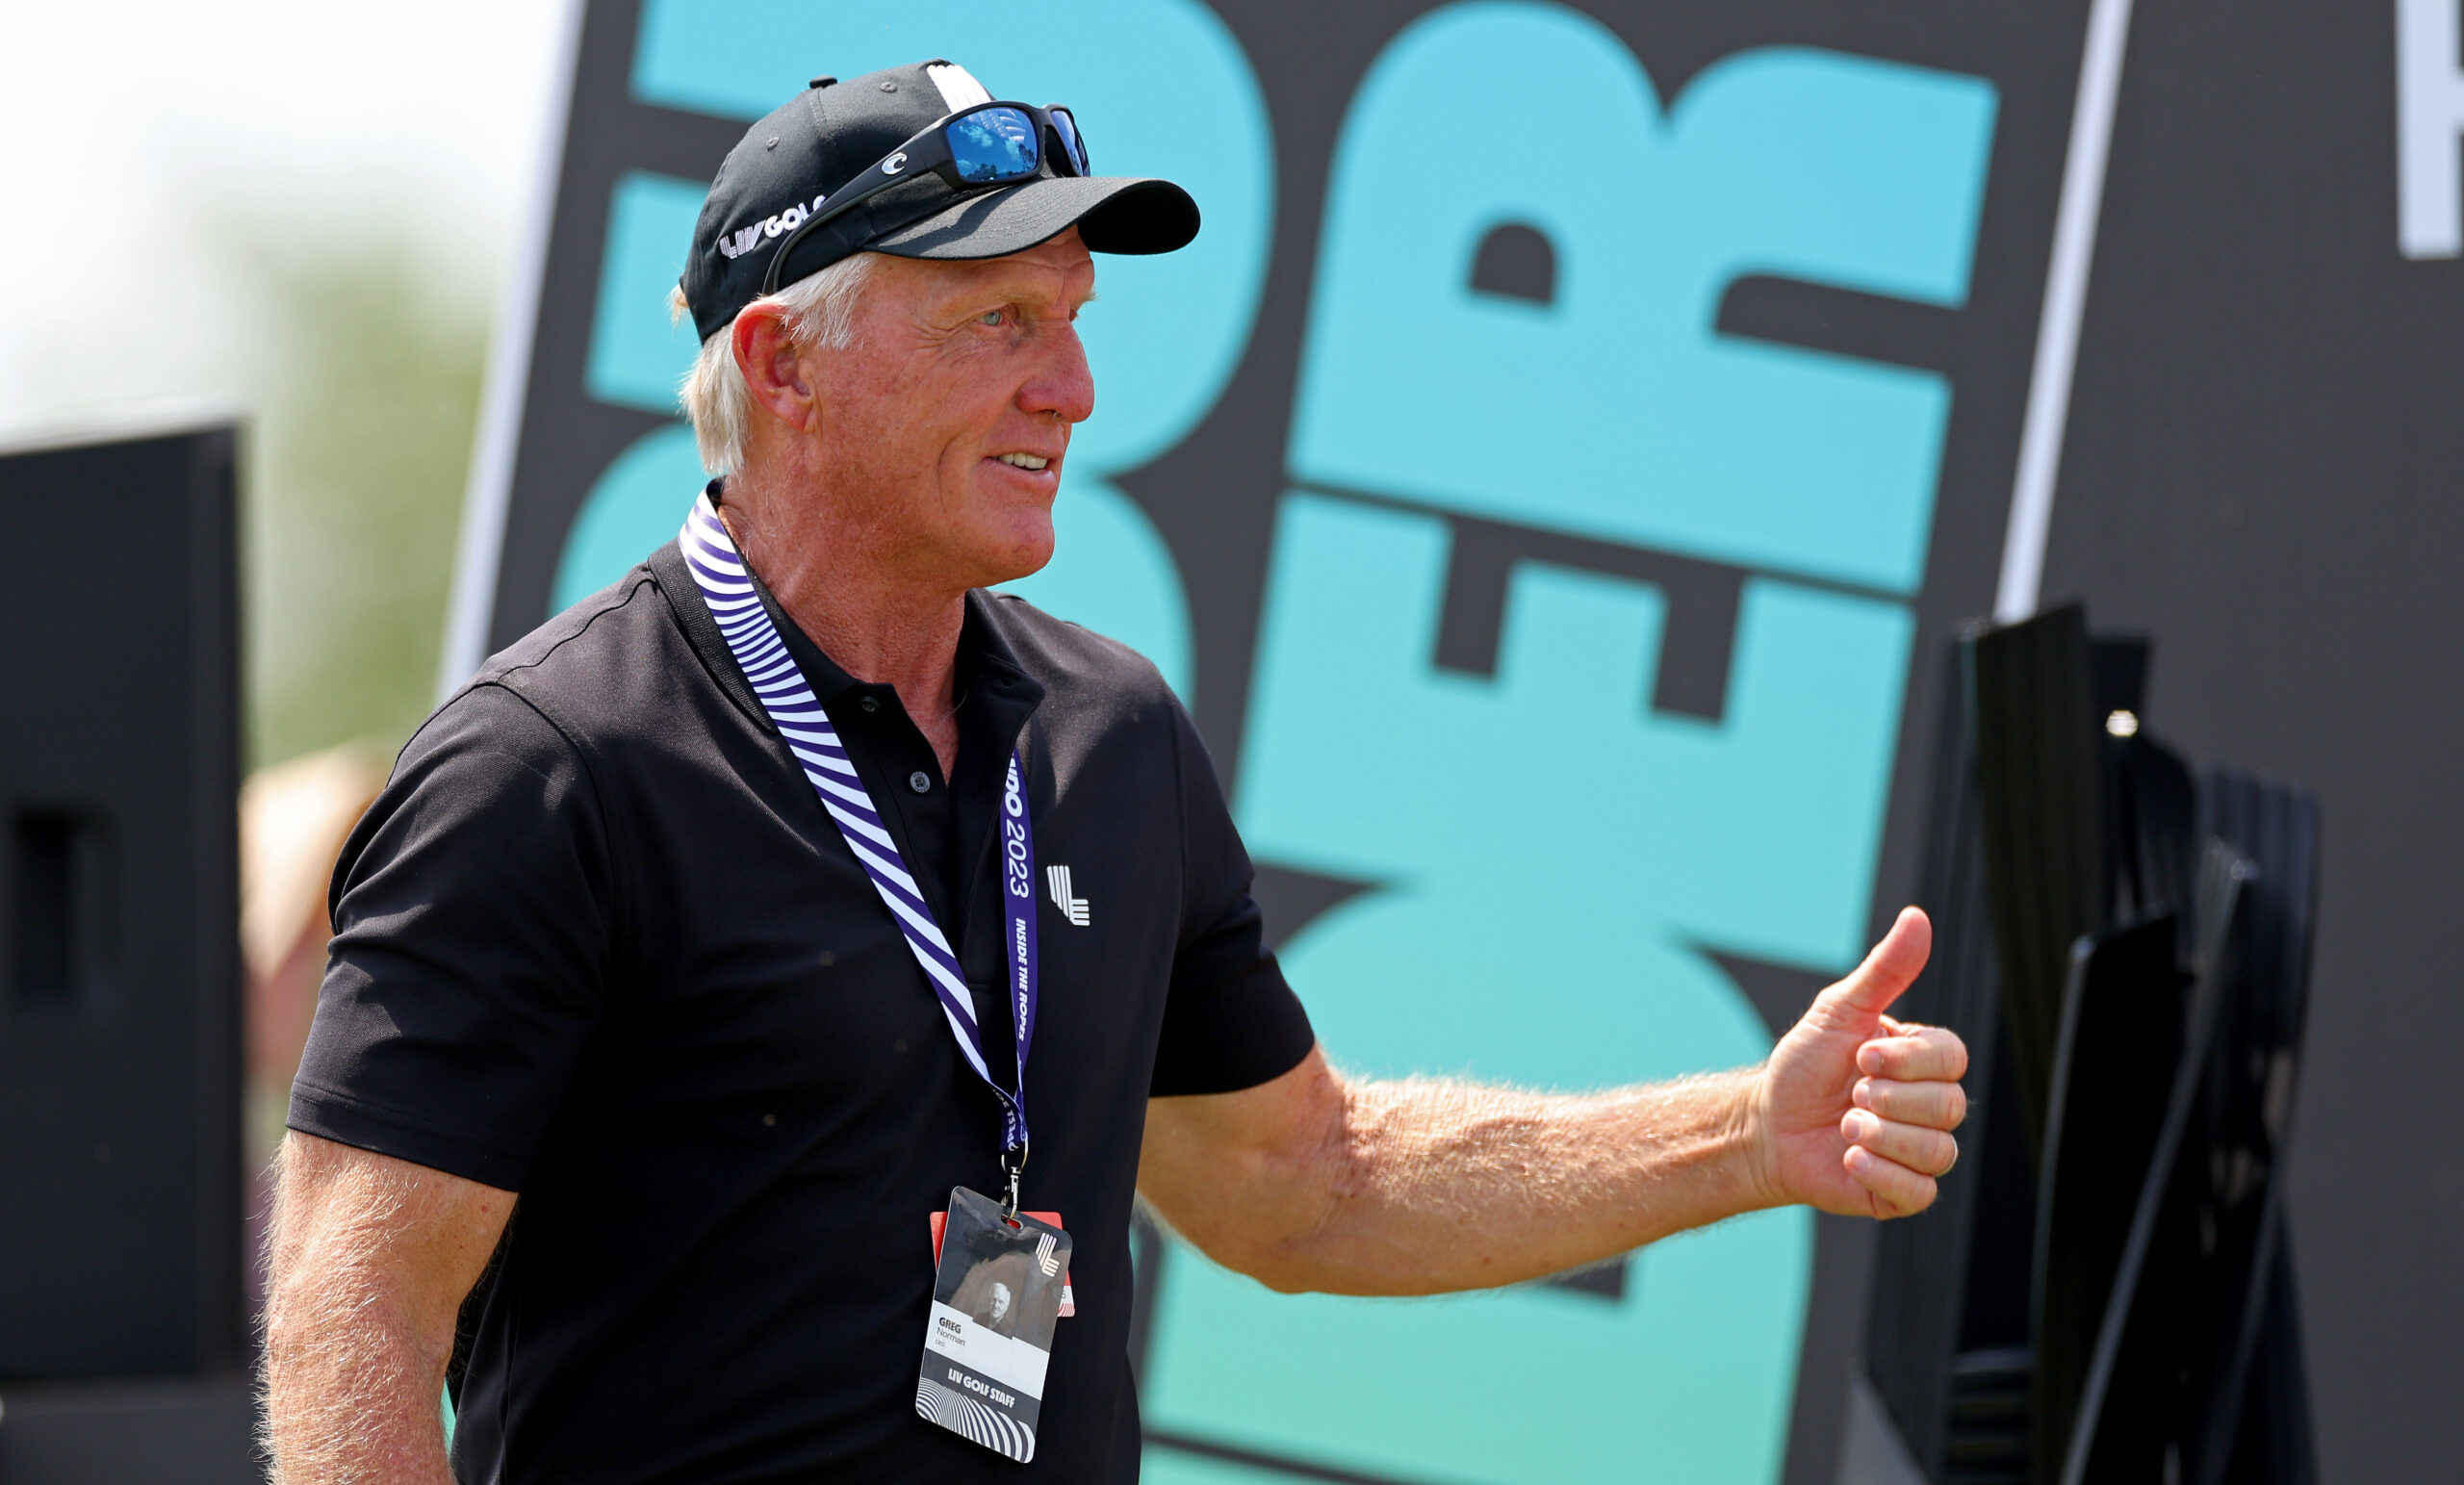 ‘How can we get involved?’: Greg Norman hints at growing interest for women’s LIV Golf League